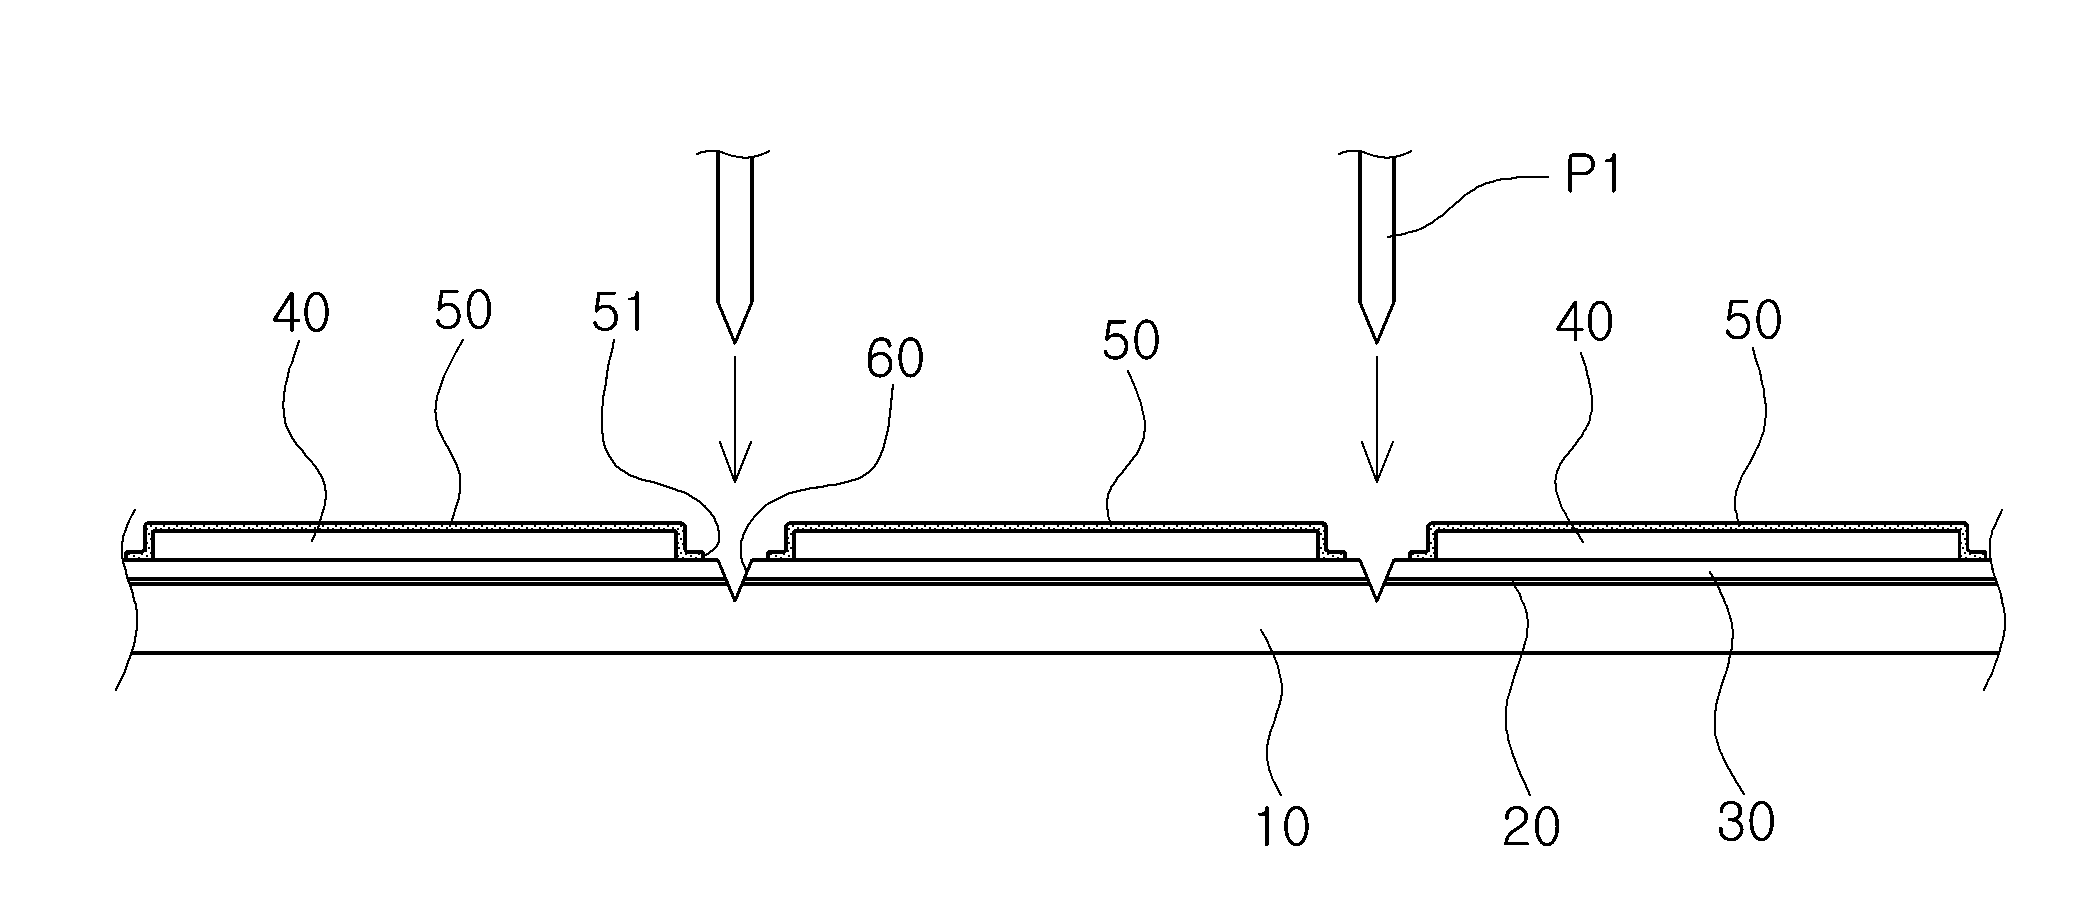 Metal copper clad laminate and method of manufacturing metal core printed circuit board using the same